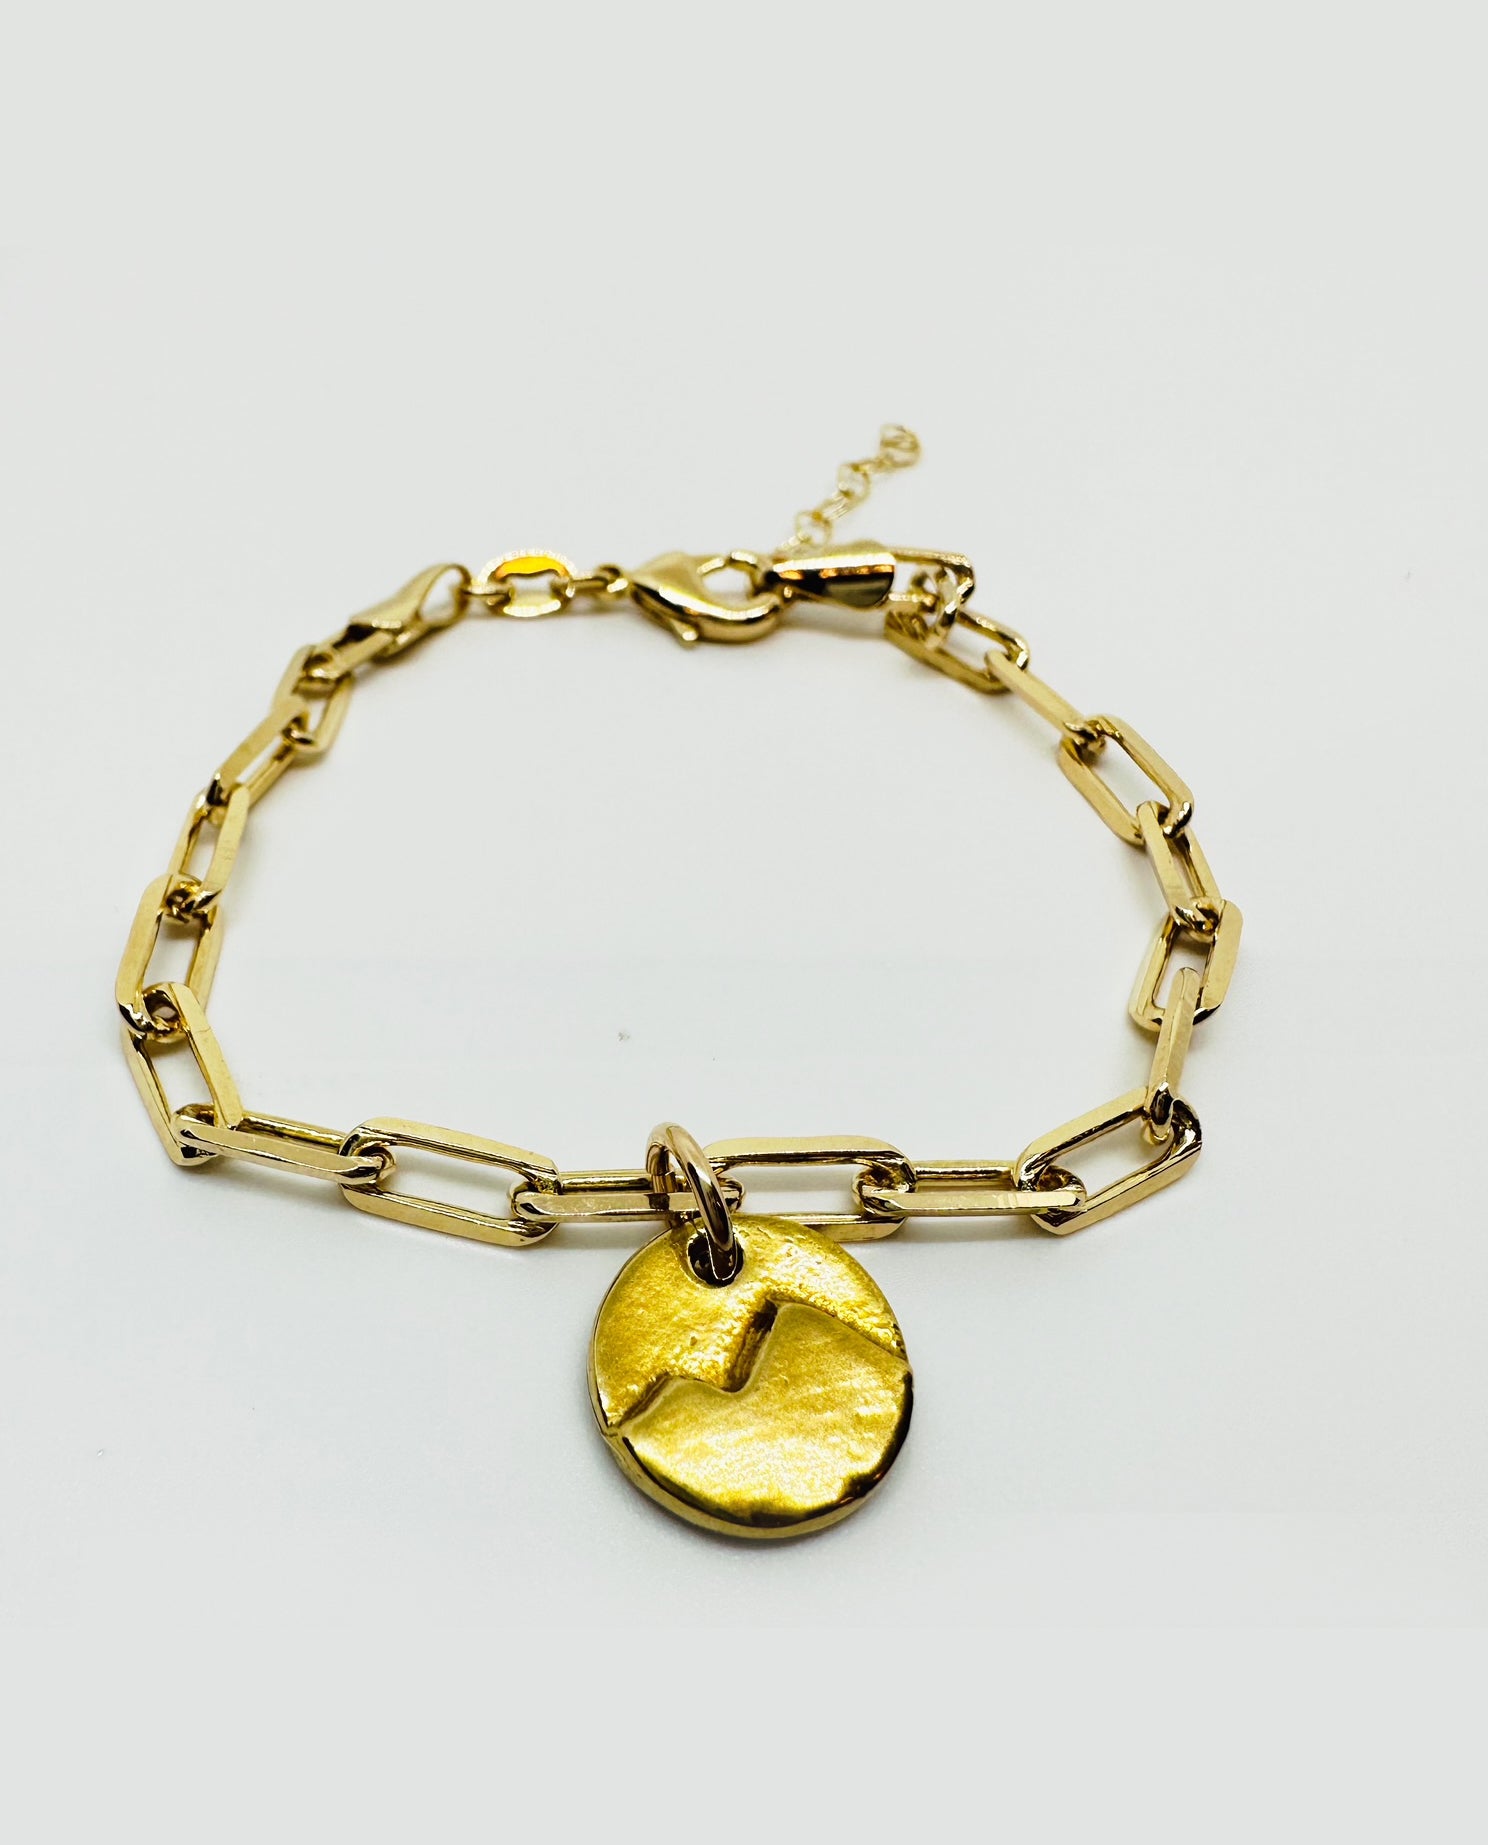 Mountain Link Bracelet. Gold-fill chain with a bronze mountain charm, handmade with a precious metal clay process. 